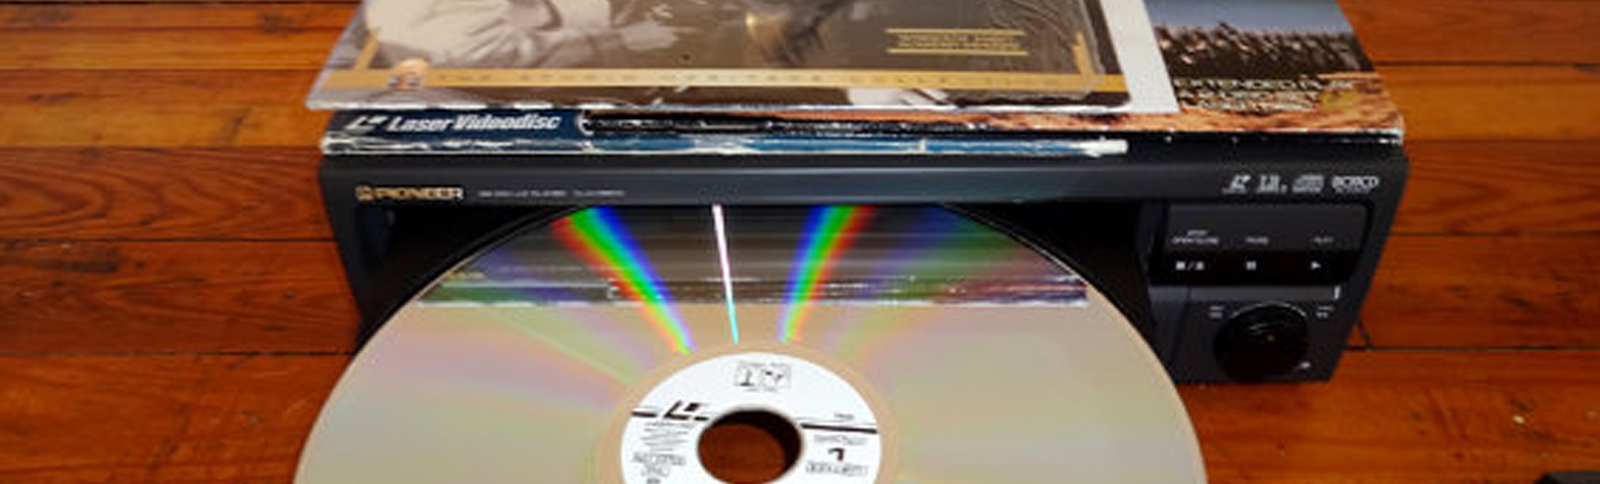 Laser Disc Conversions to Digital File or DVD in Oxfordshire UK